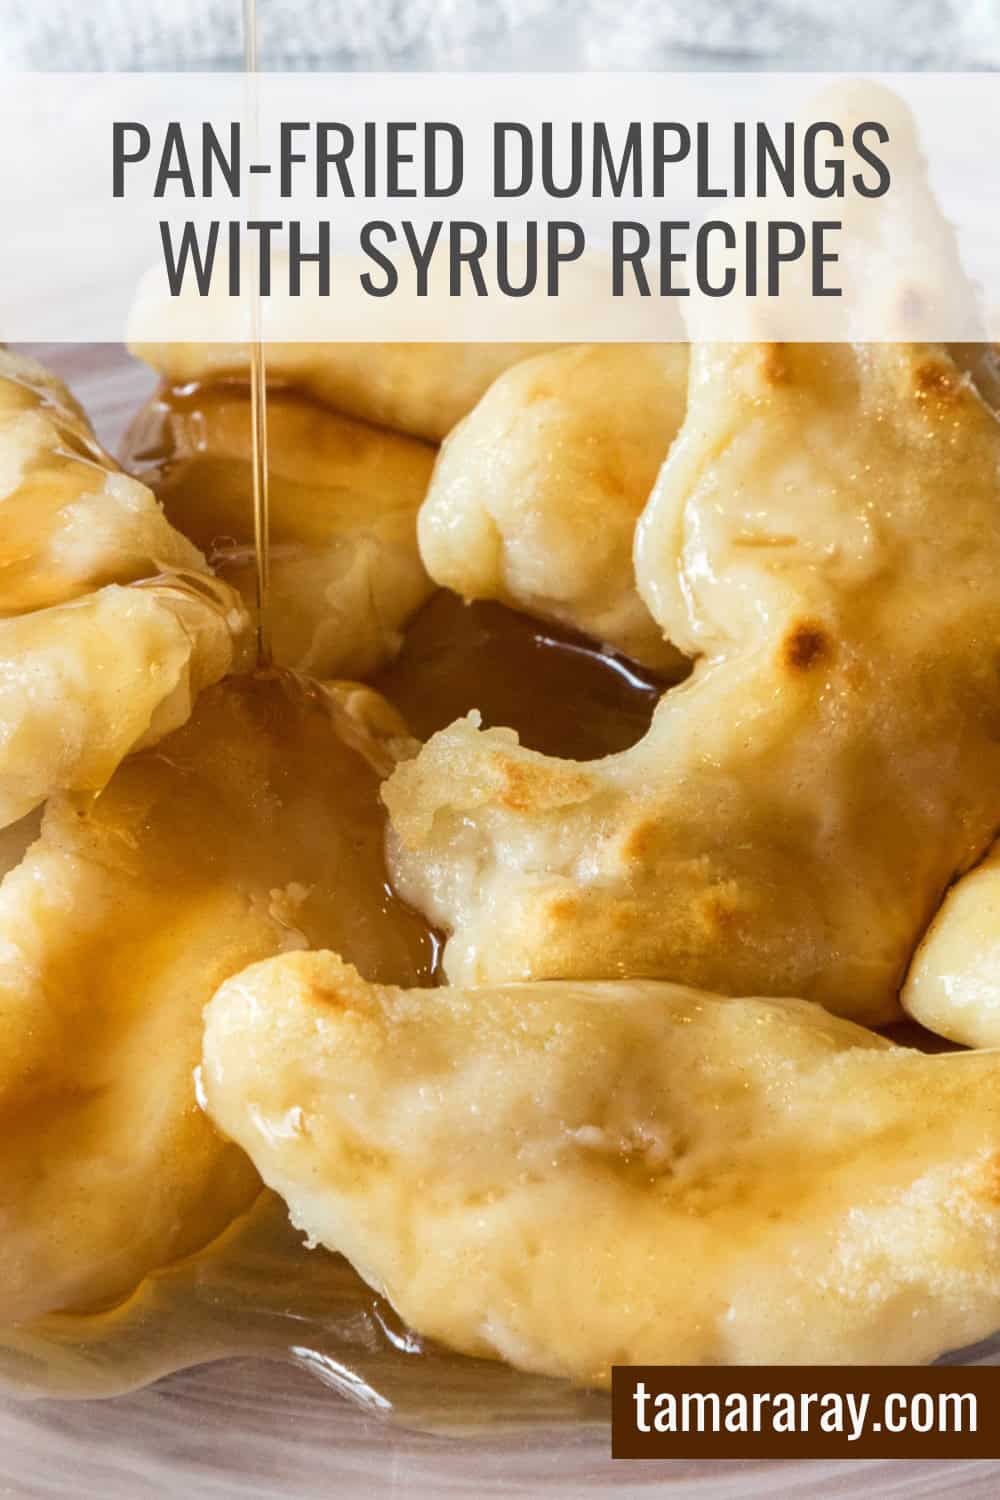 Fried dumplings with syrup.